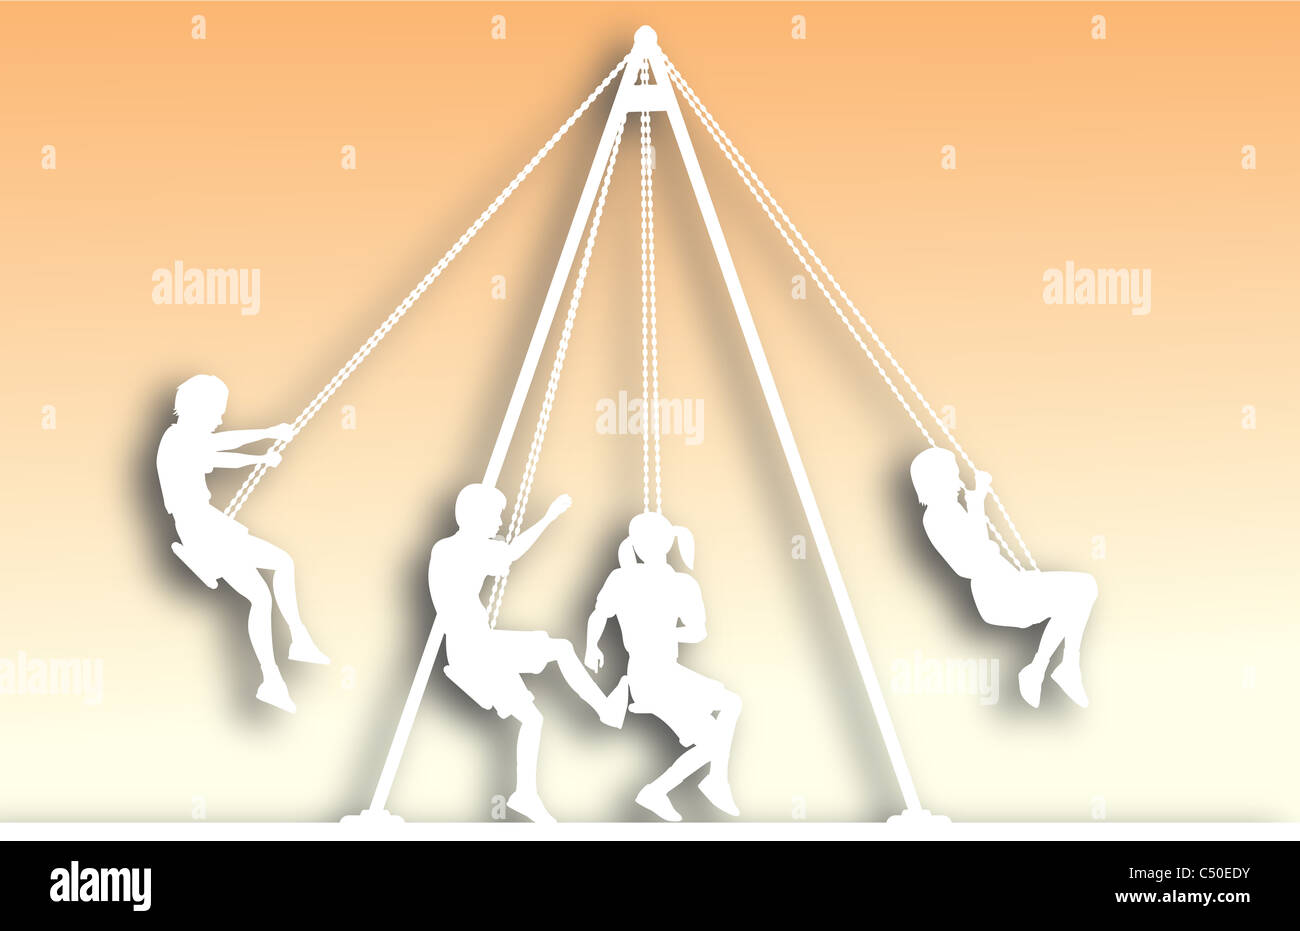 Illustrated cutout of children on playground swings Stock Photo